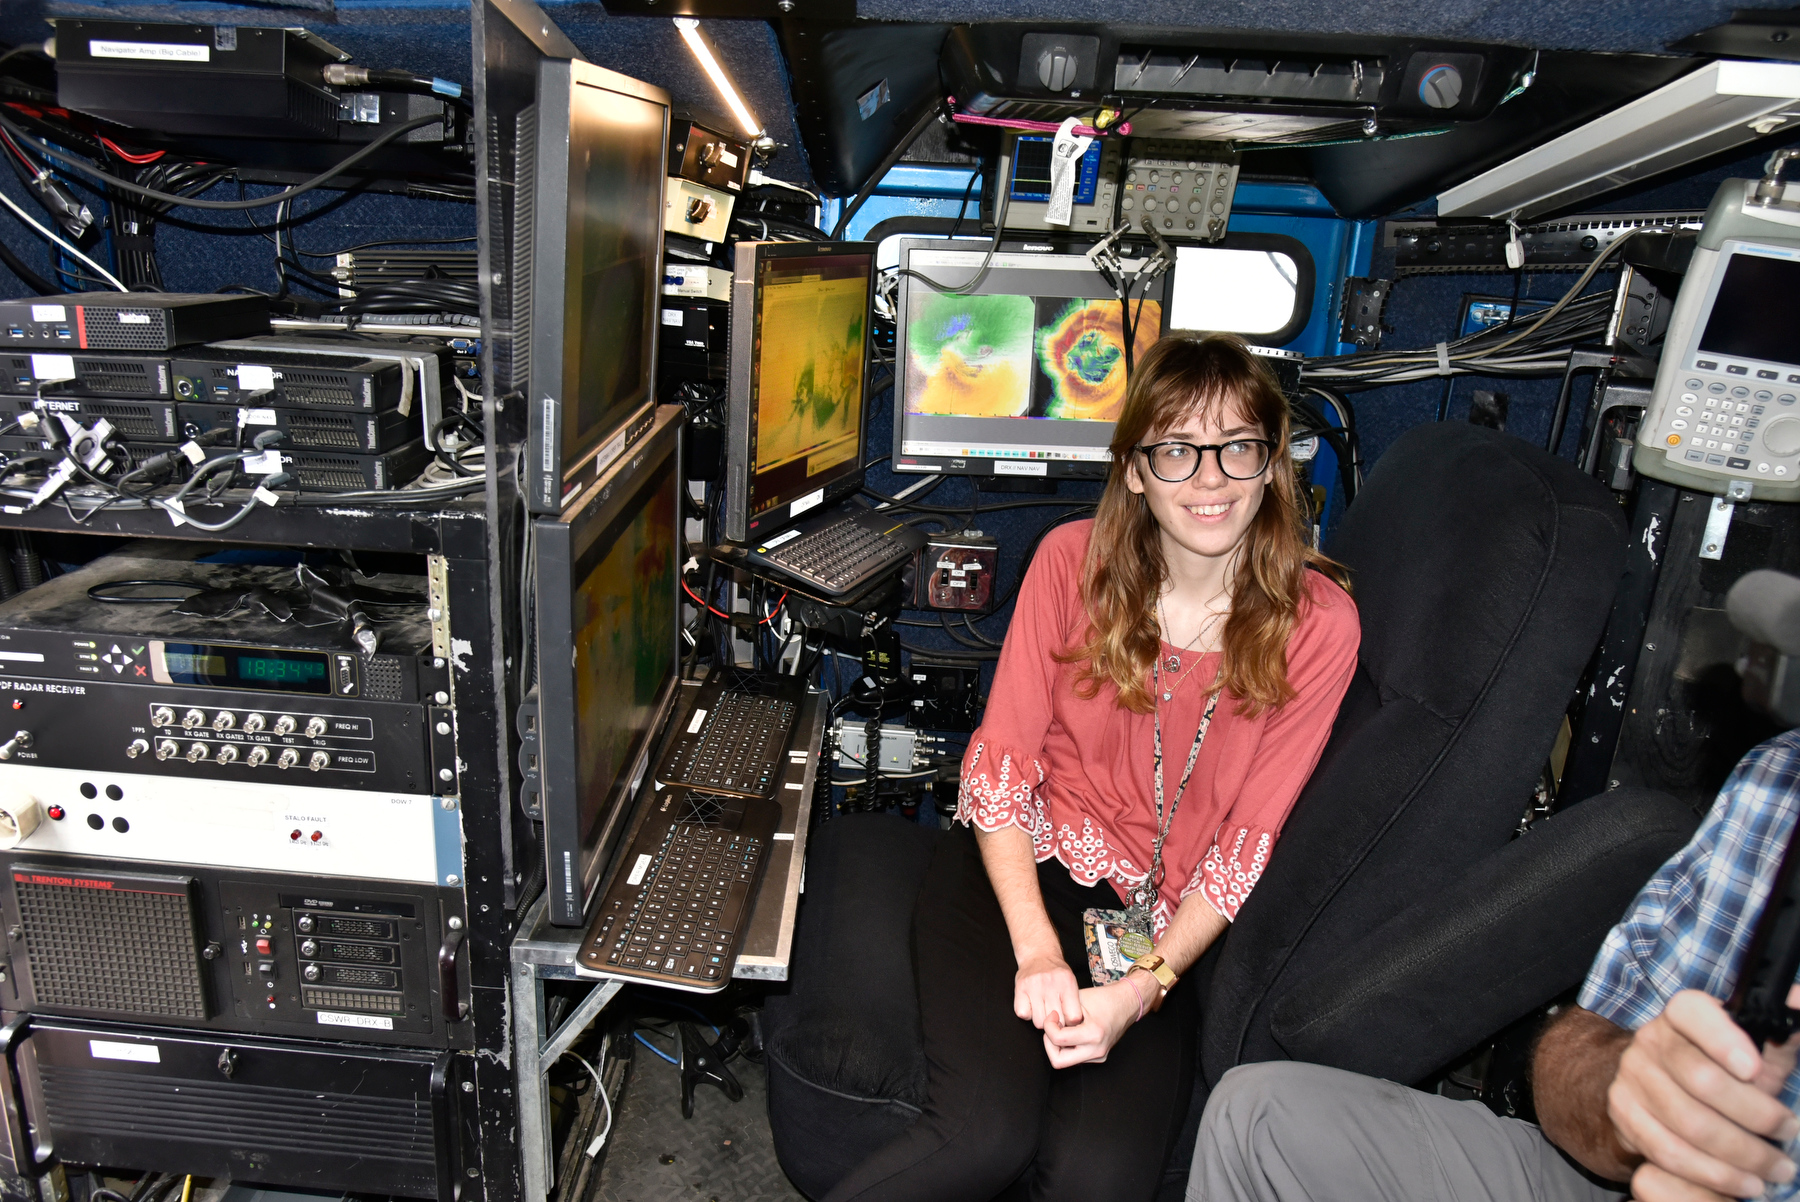 Samantha Karlsson, a senior meteorology major, sits at the array of meteorological instrumentation in the Doppler on Wheels (DOW) displayed during SUNY Oswego meteorology open house Nov. 5 outside the Shineman Center. 